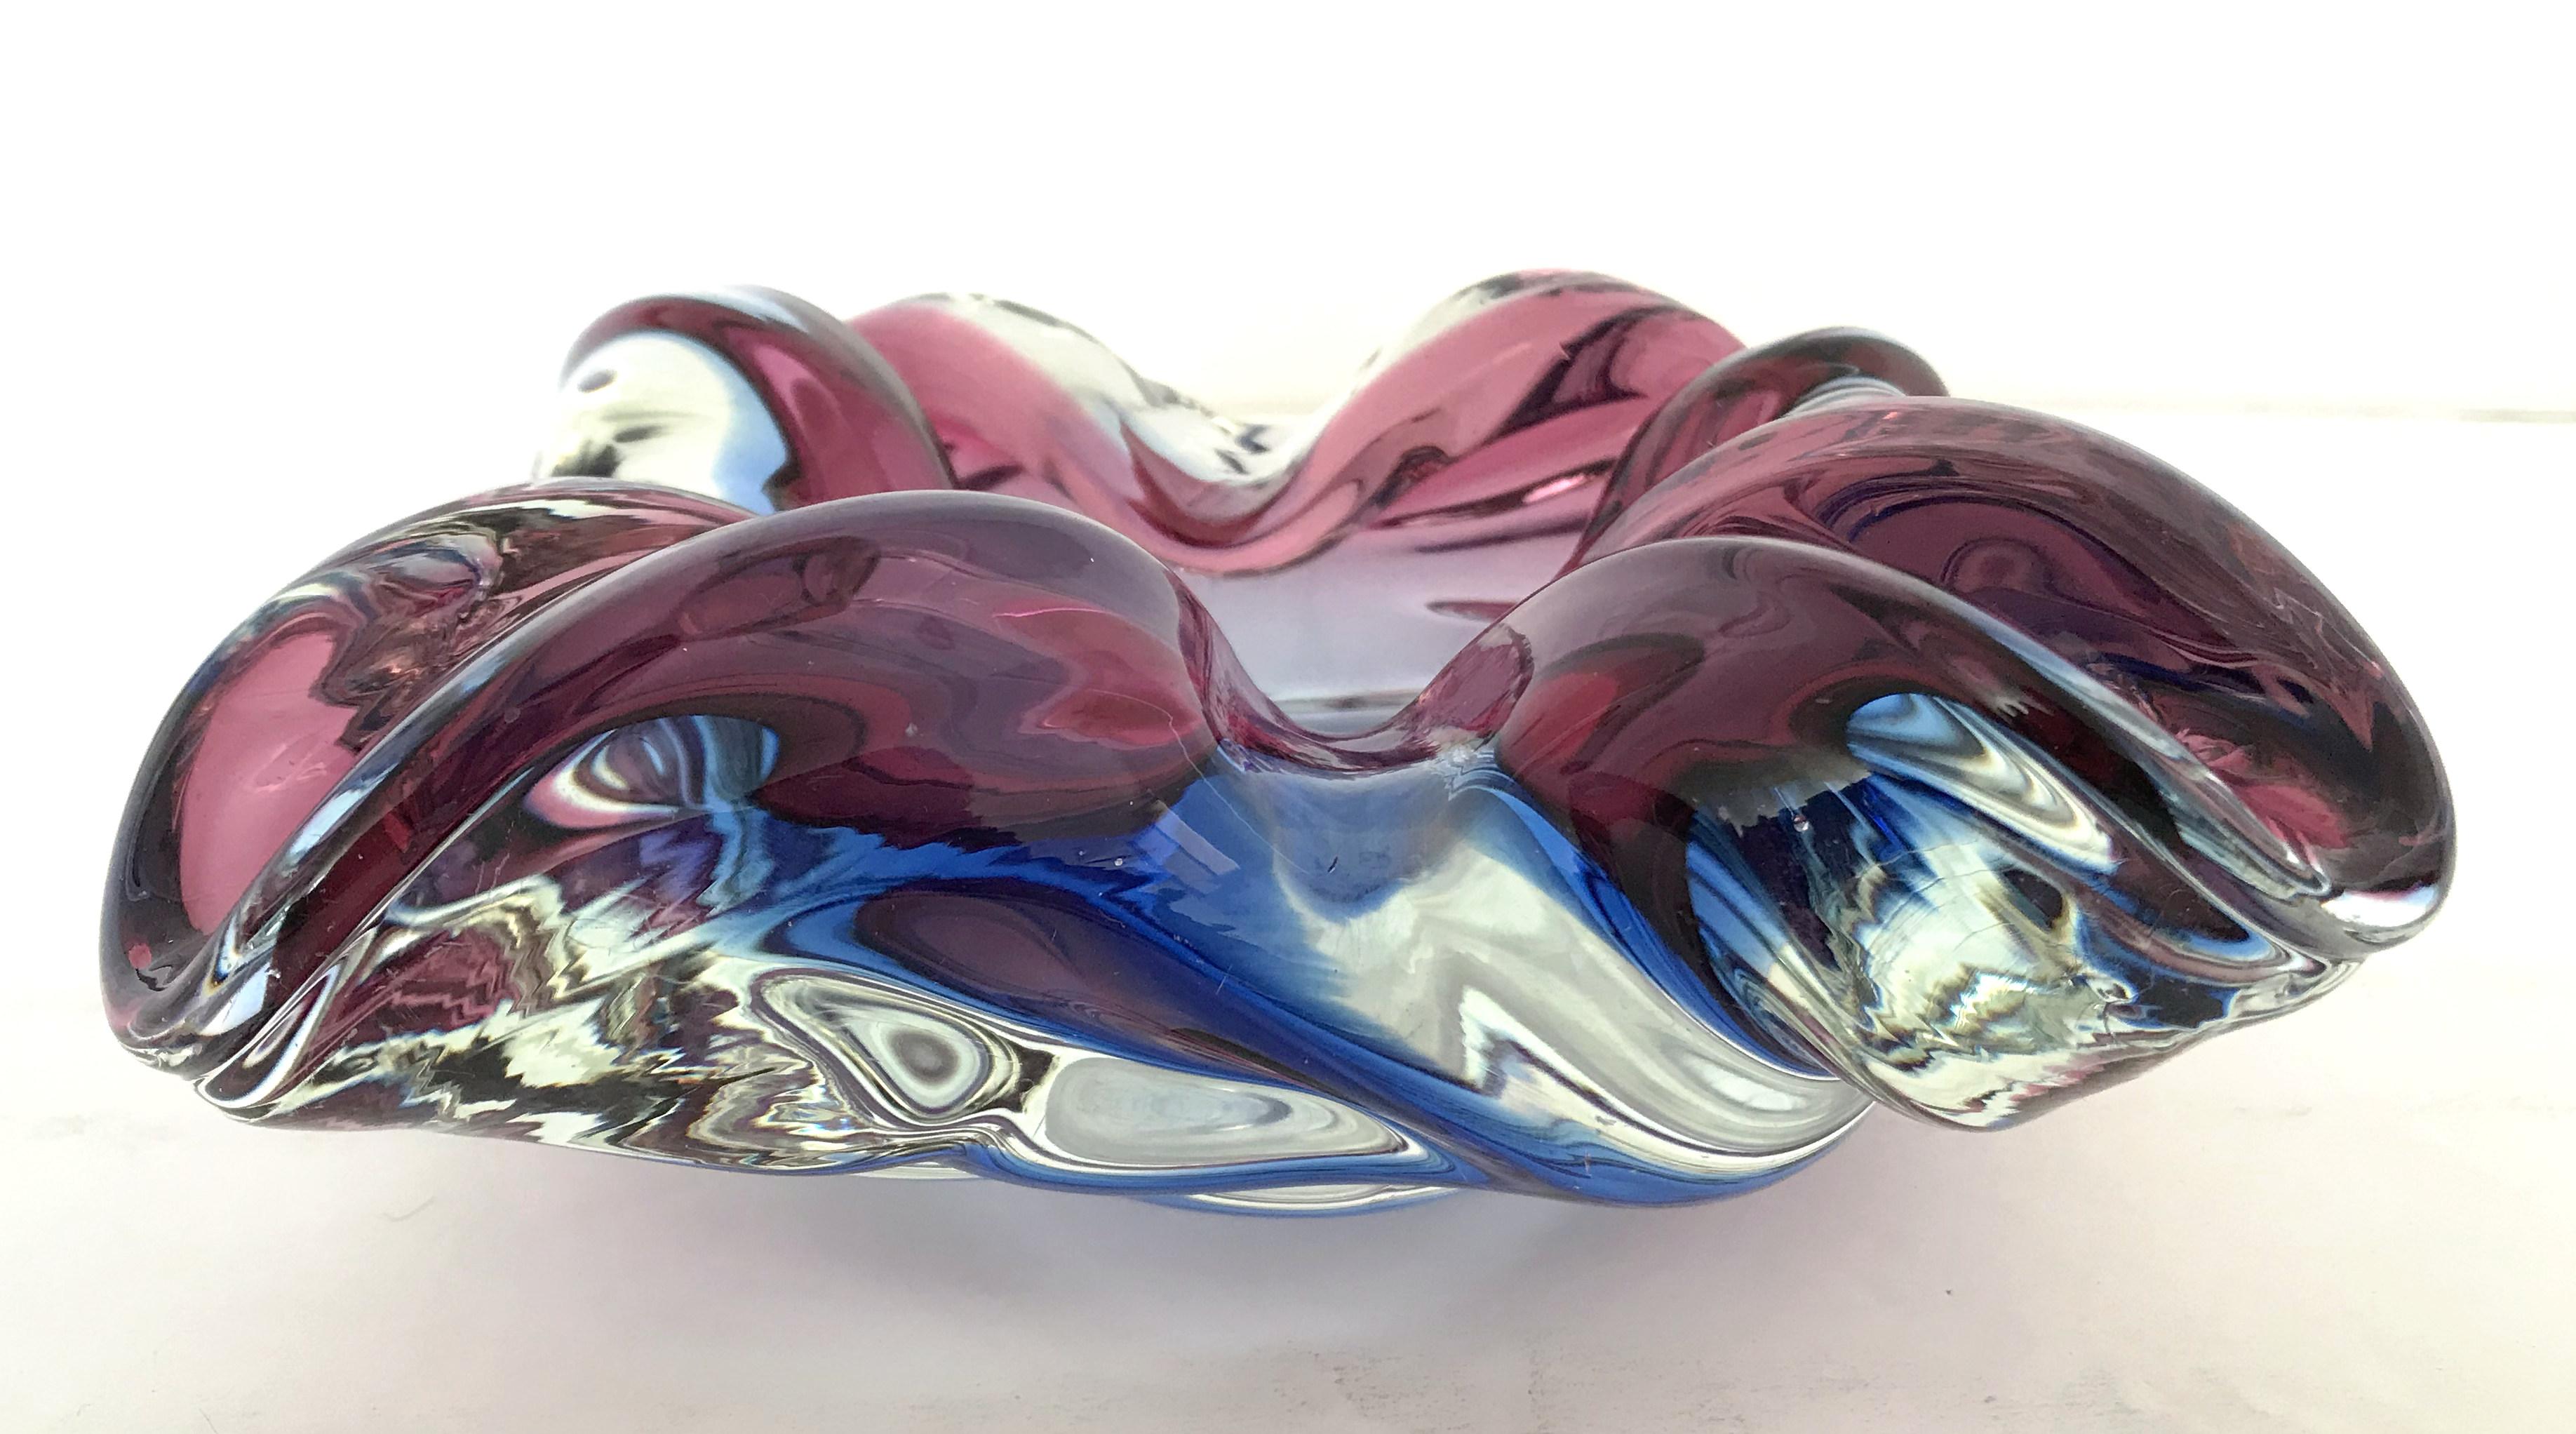 Vintage Italian amethyst and blue Murano glass ashtray or bowl / Made in Italy, circa 1960s
Measures: length 7 inches, width 7 inches, height 2.5 inches
1 in stock in Palm Springs ON 50% OFF SALE for $499 !!
Order Reference #: FABIOLTD G169
This